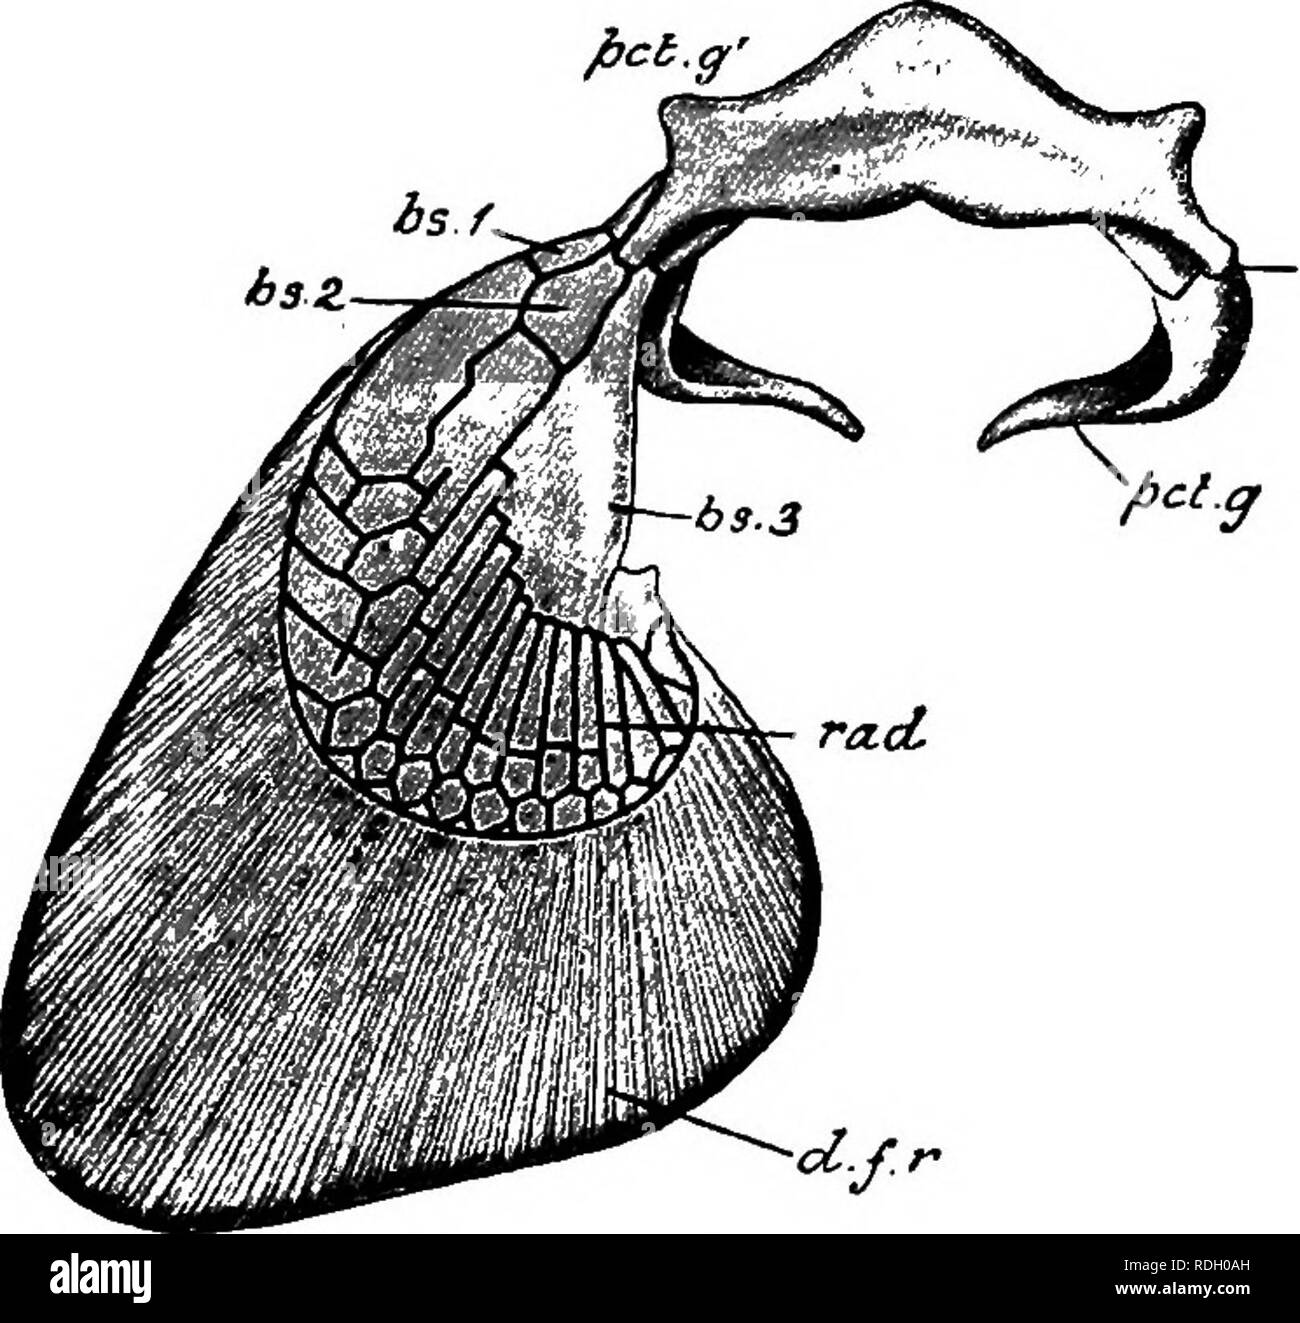 . An elementary course of practical zoology. Zoology. ix pfiCToRAL Fin 427 arch. On each side of its outer surface it presents three articular facets for the pectoral fin; the presence of these allows of the division of each side of the arch into a narrow, pointed, dorsal portion corresponding to the scapular region of the frog {pet. g), and a broader rtf. Fig 106.—Ventral view of pectoral arch Ot ScyUium with right pectoral fin. The pectoral arch is  divisible into dorsal or scapular i^pct. g) and ventral or cora- coid ipci.g') portions separated by the articular facets {art. f) for the fin.  Stock Photo